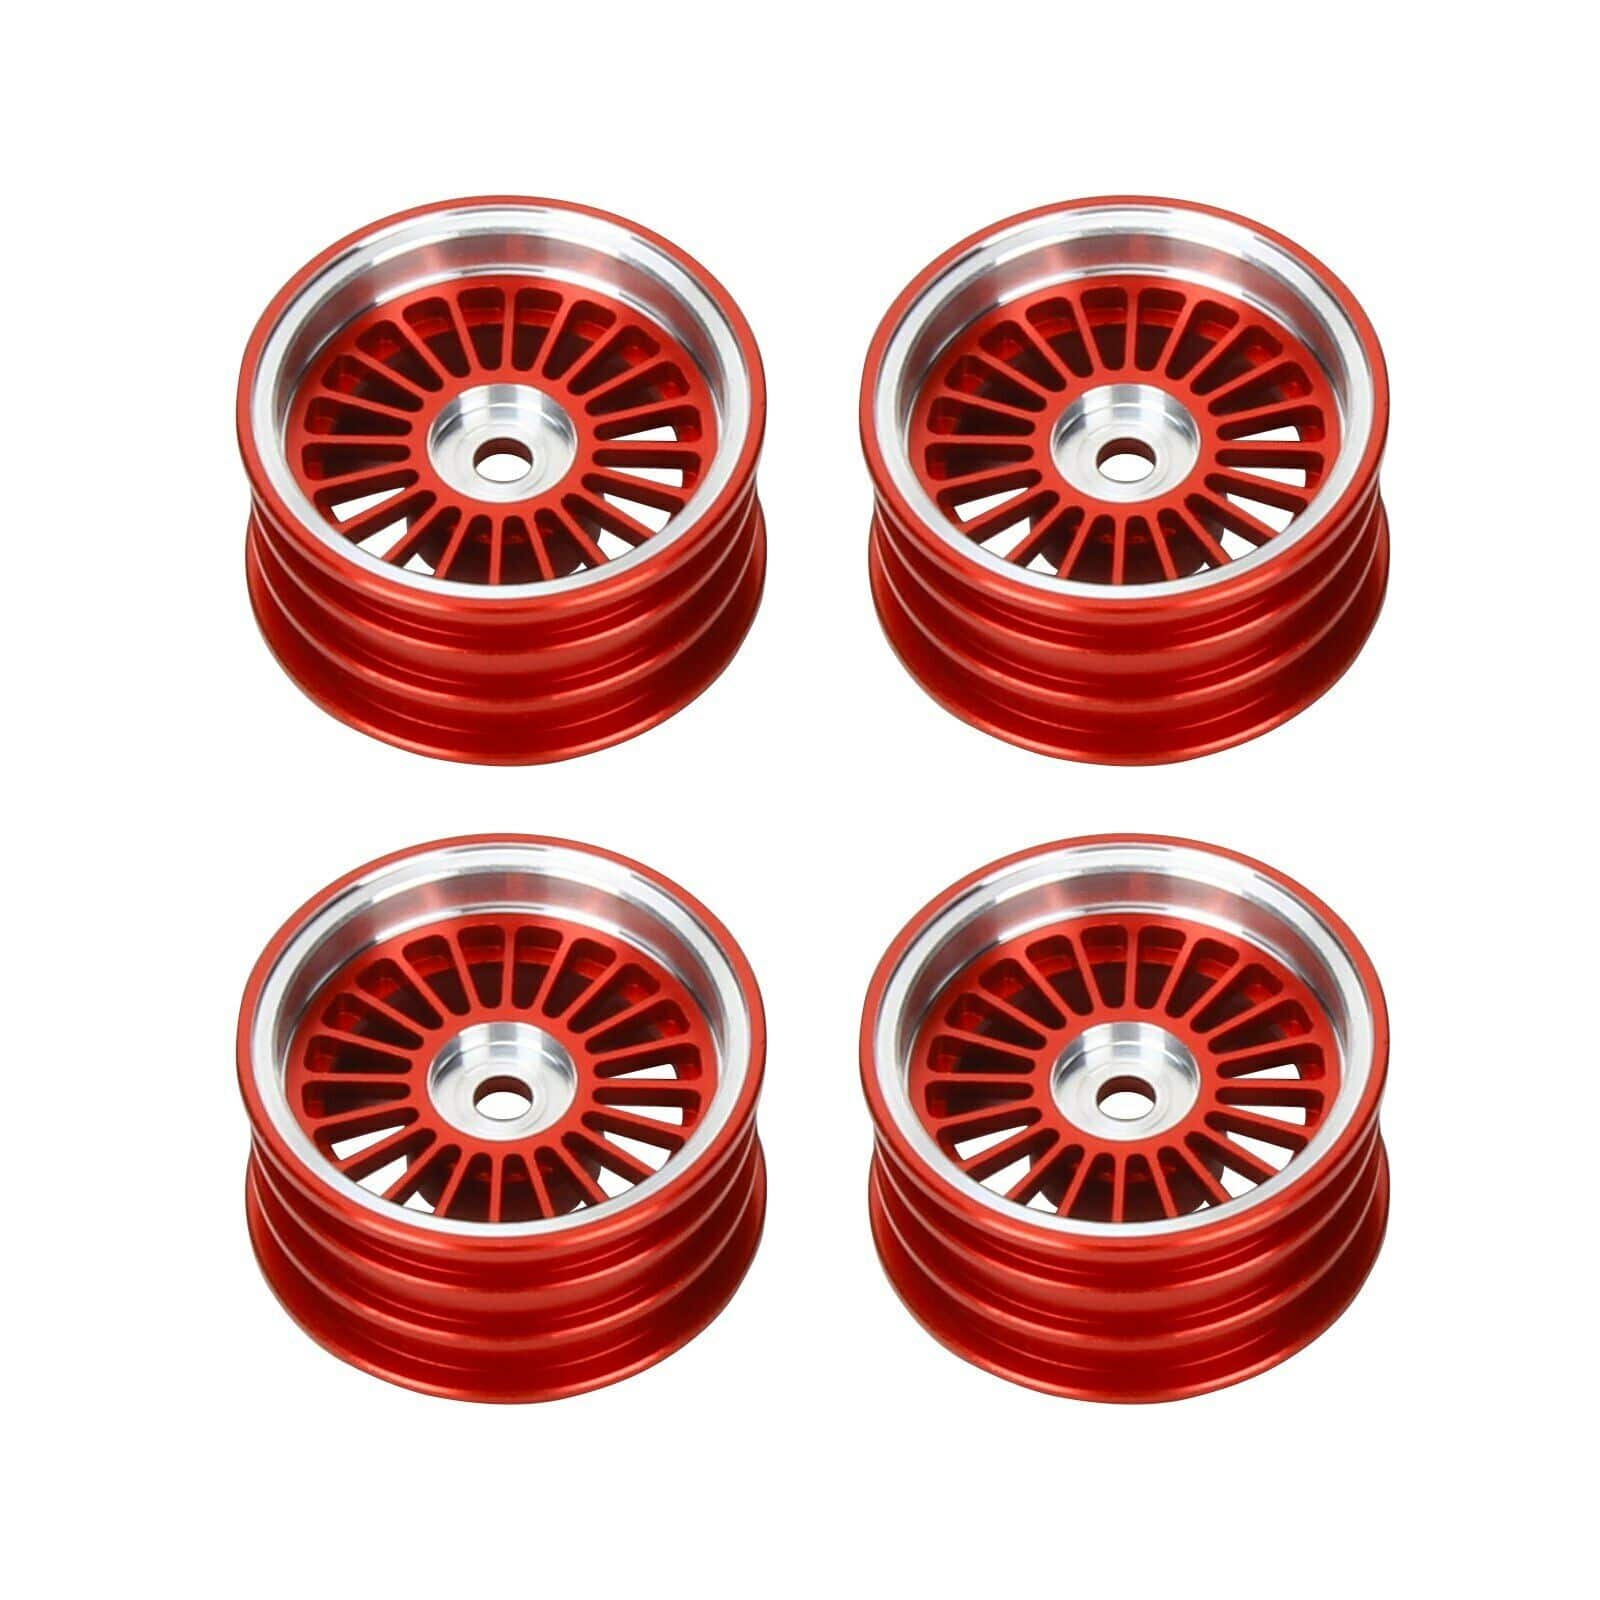 RCAWD AXIAL UPGRADE PARTS Red RCAWD Metal Wheel for Axial SCX24 Crawlers AXI90081 AXI00001 AXI00002